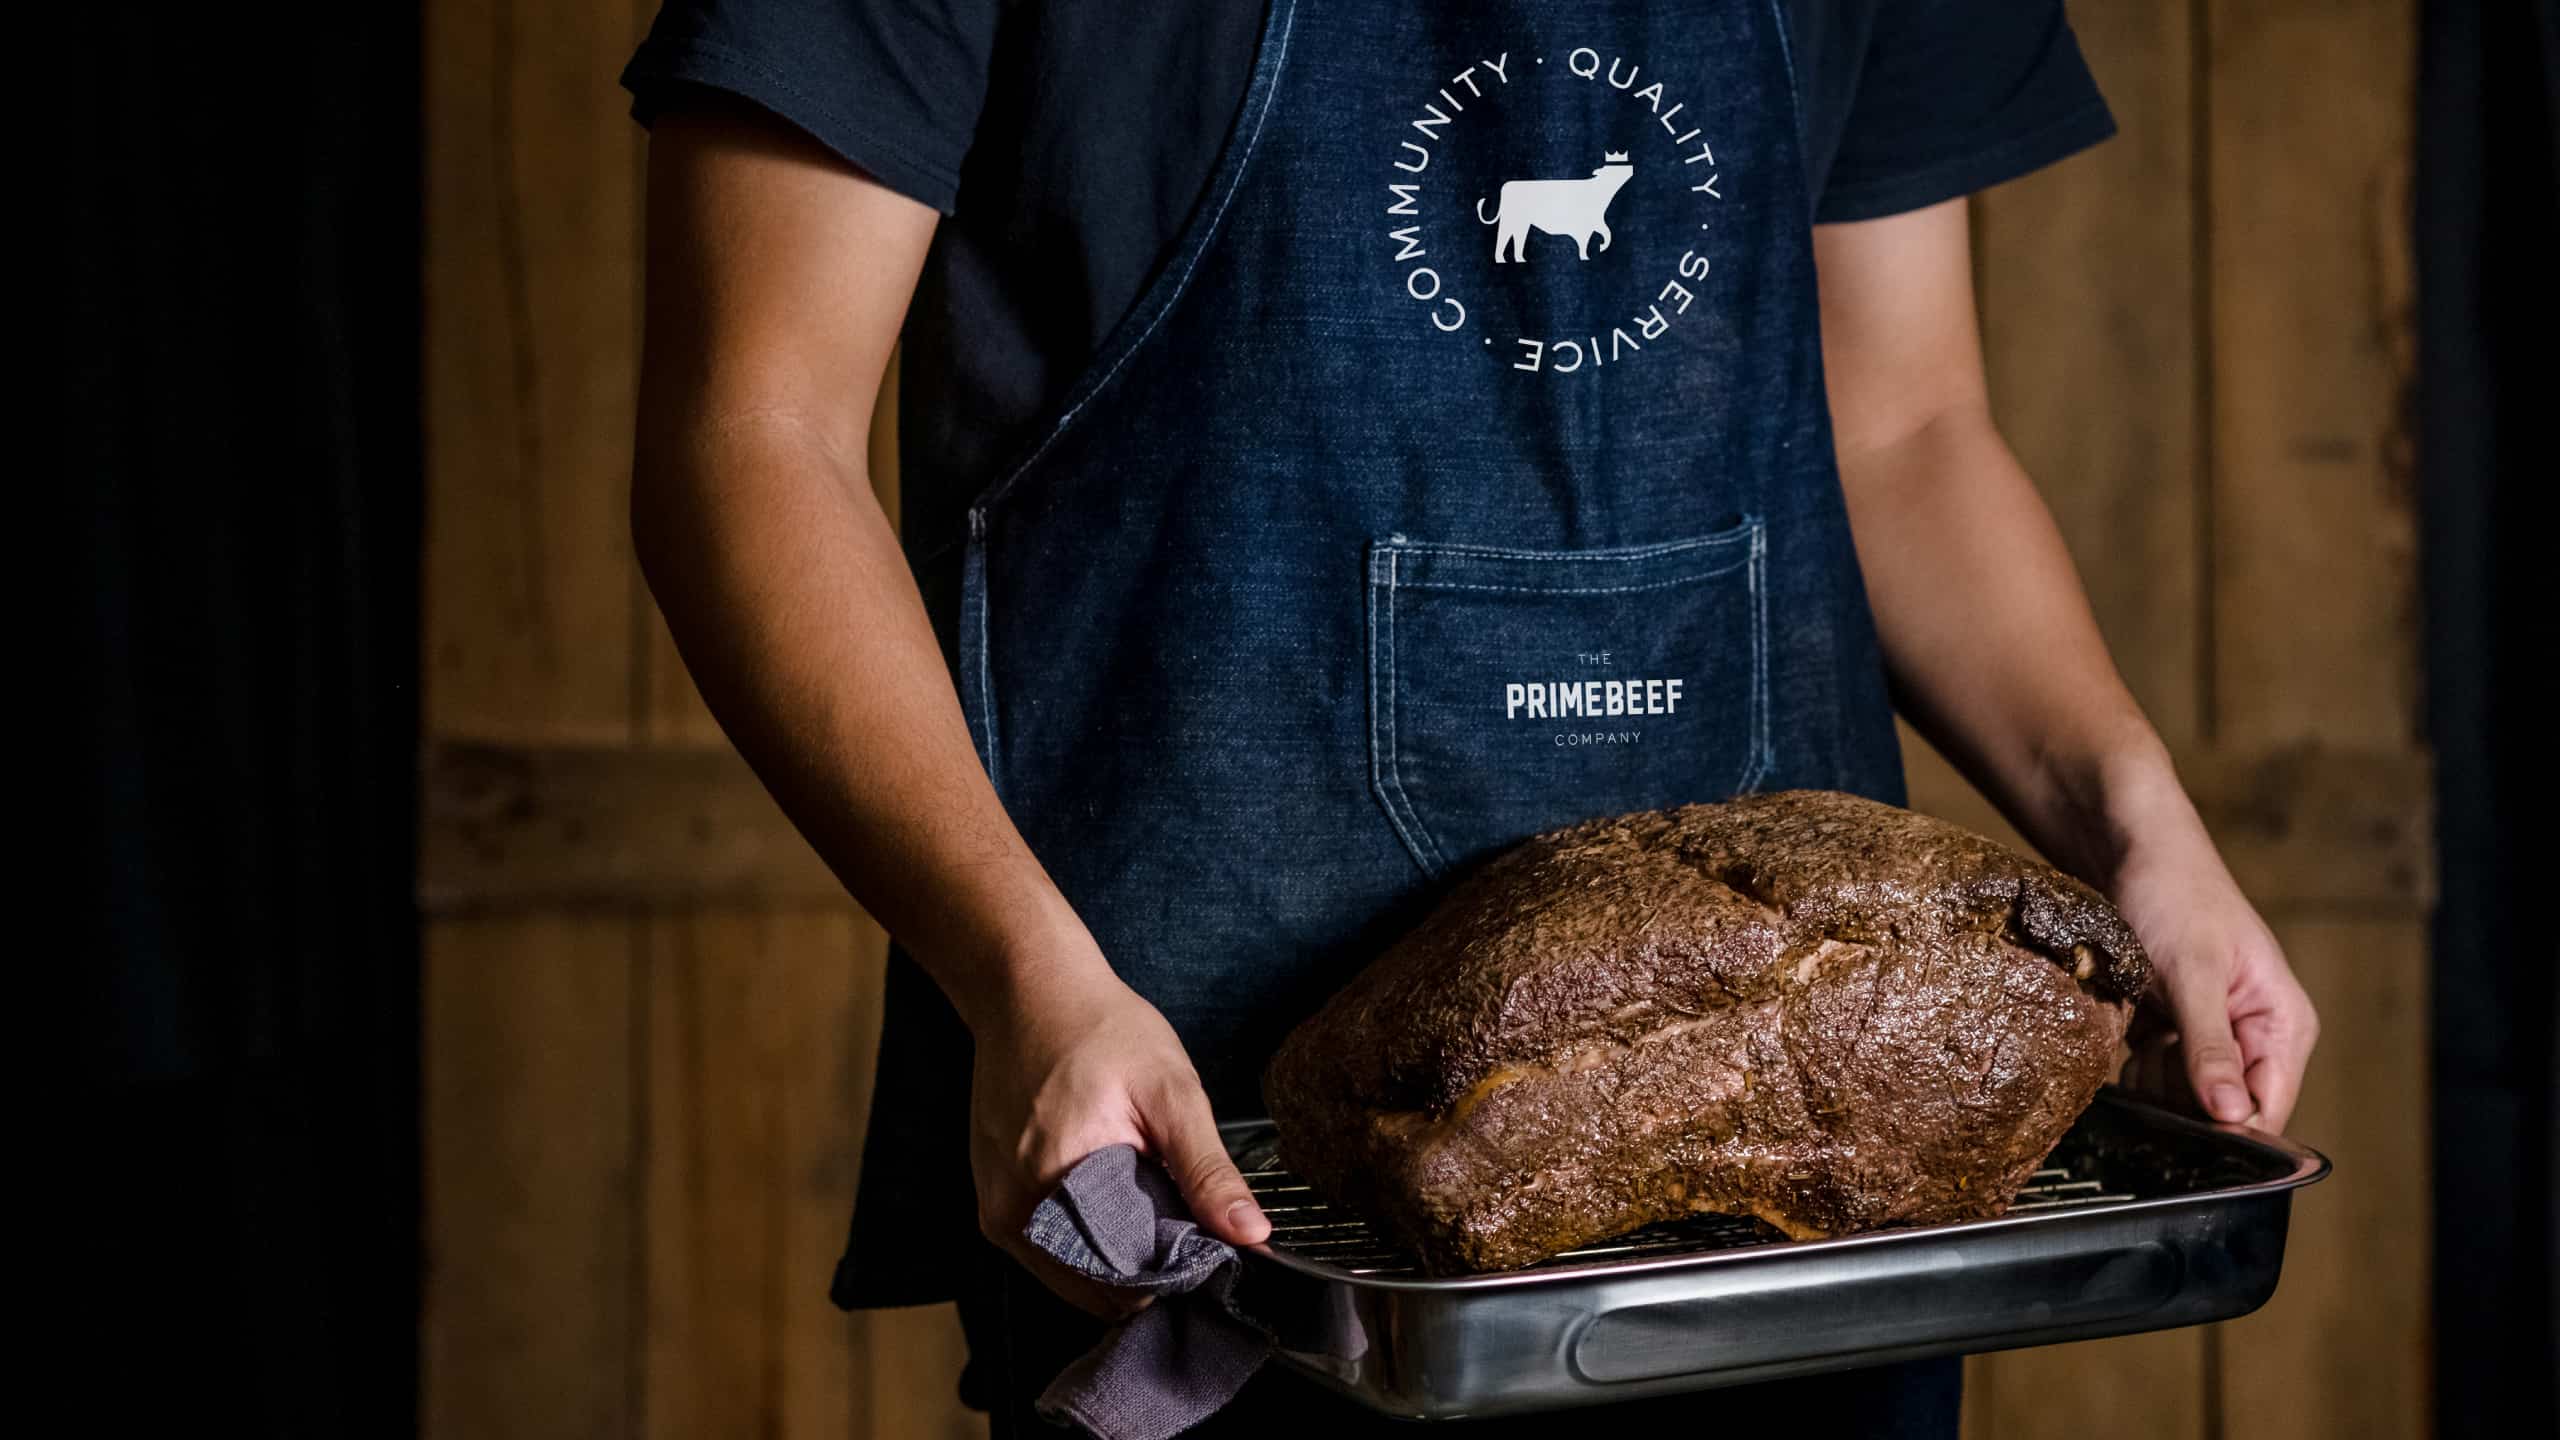 Delicious cut of meat carried by man in branded apron for Filipino meat brand Primebeef